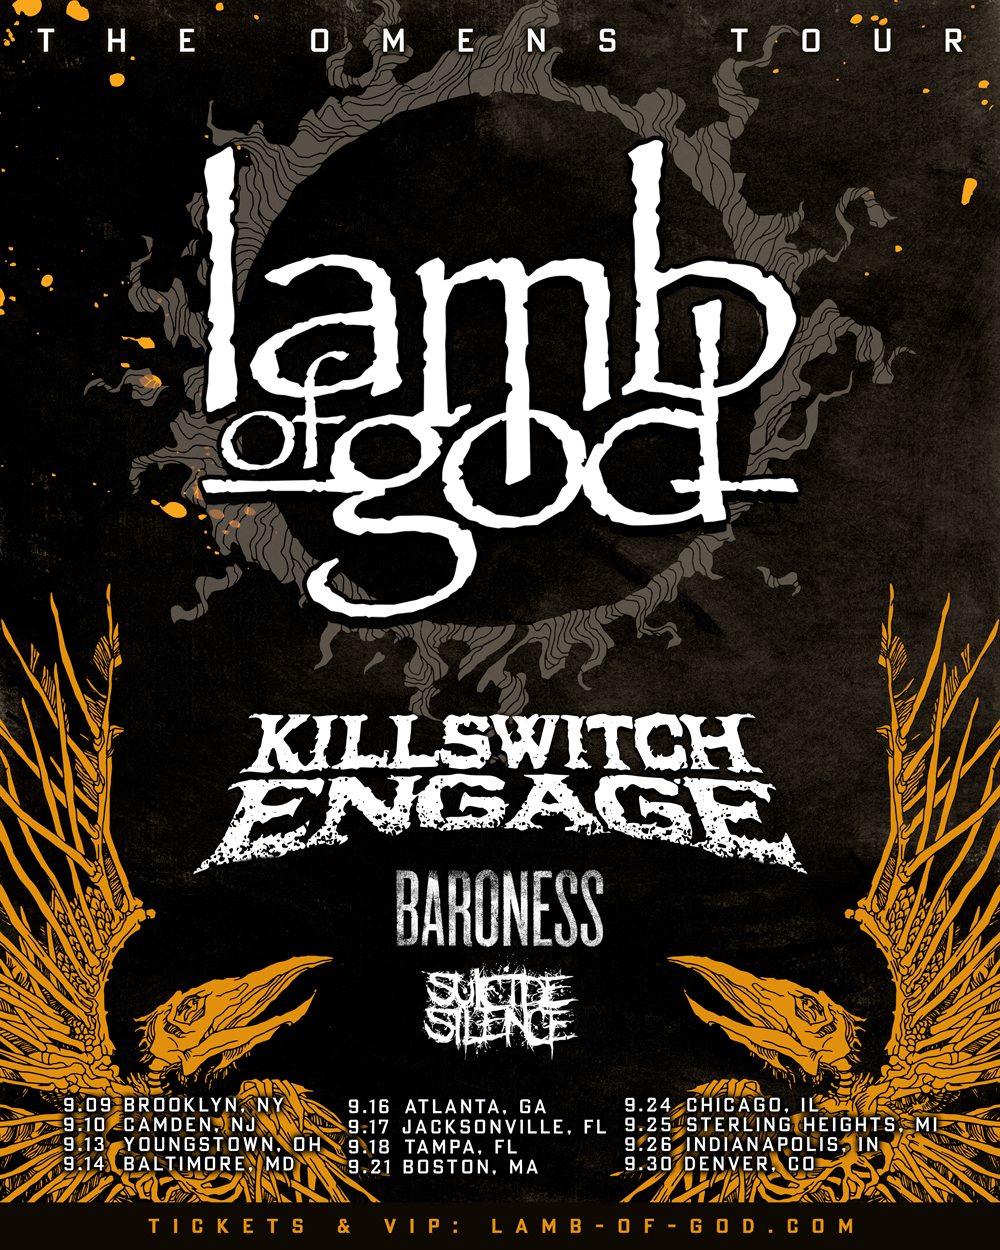 US Tour with Lamb Of God & Killswitch Engage September 2022 Baroness